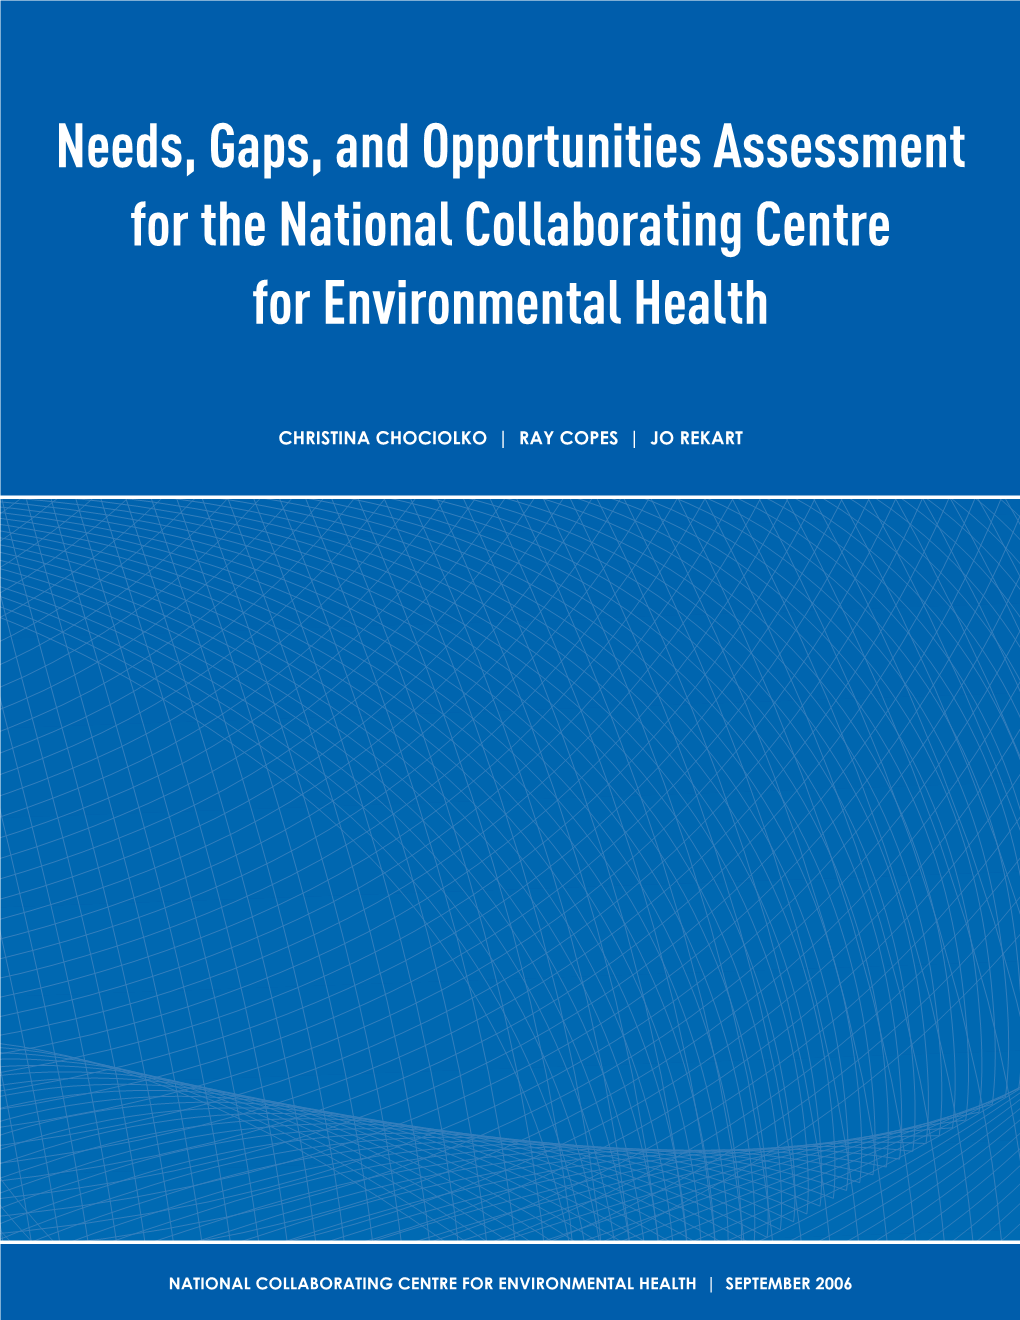 Needs, Gaps, and Opportunities Assessment for the National Collaborating Centre for Environmental Health